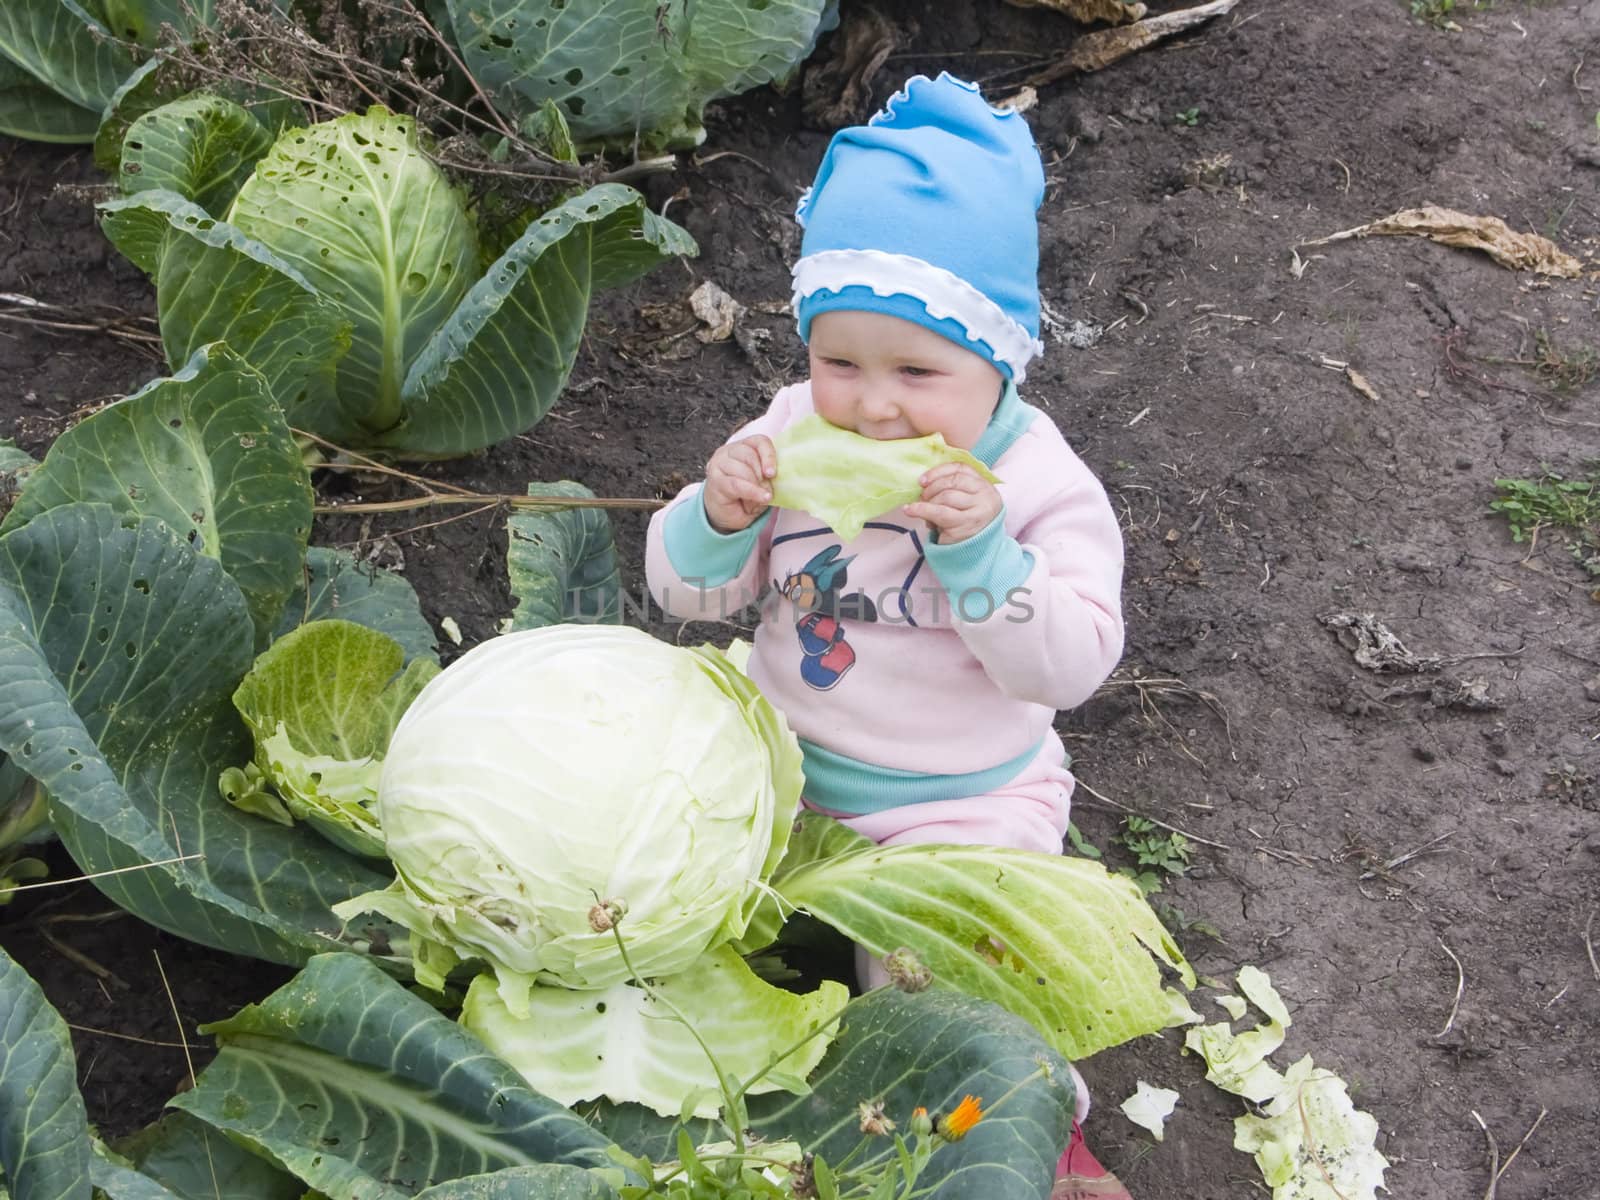 Me have found in cabbage! by soloir